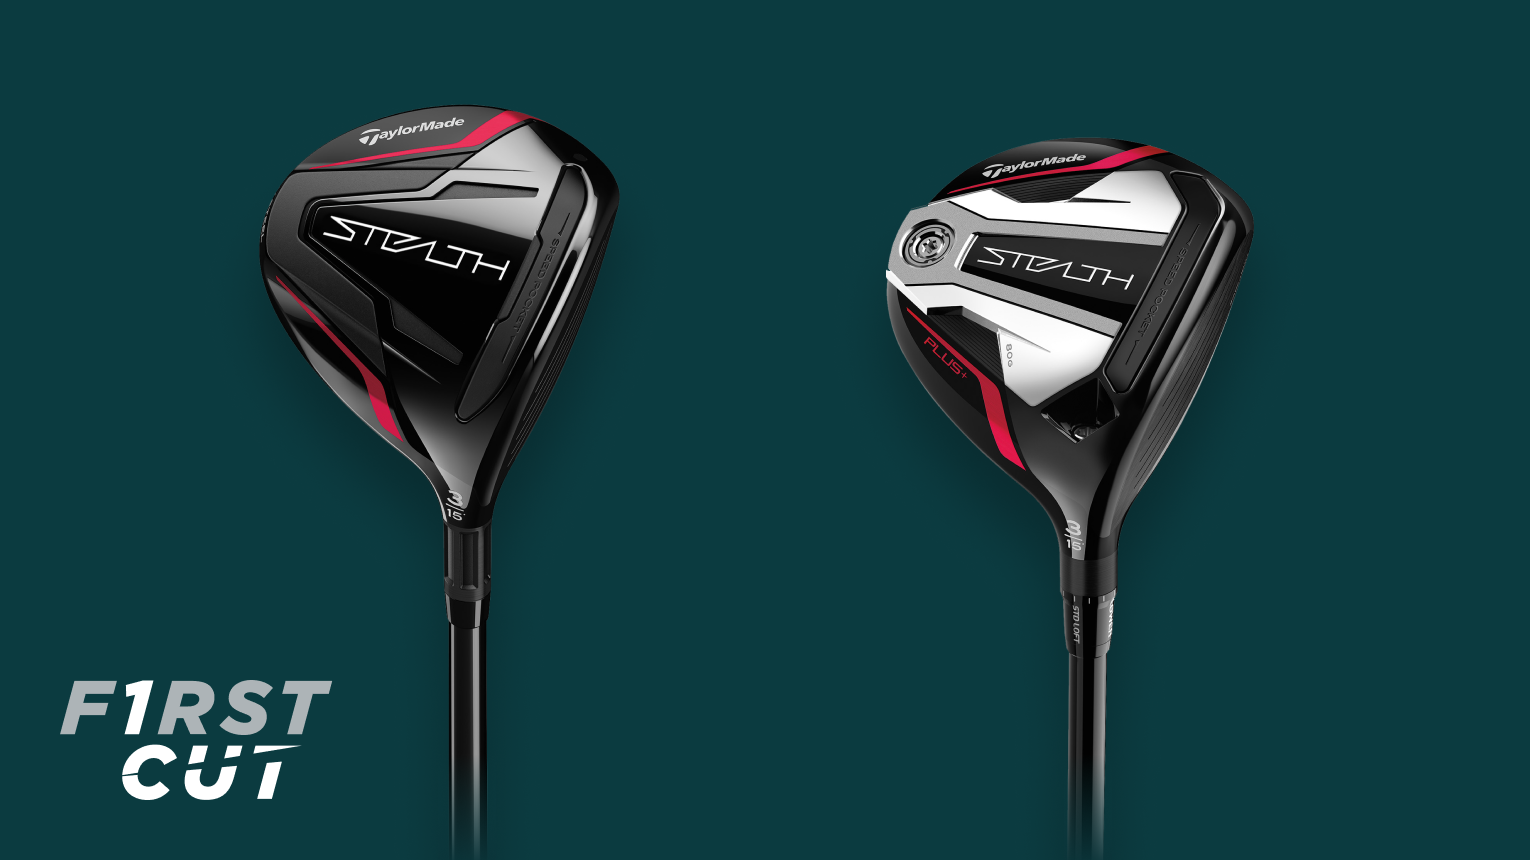 TaylorMade Stealth fairway woods and hybrids: What you need to